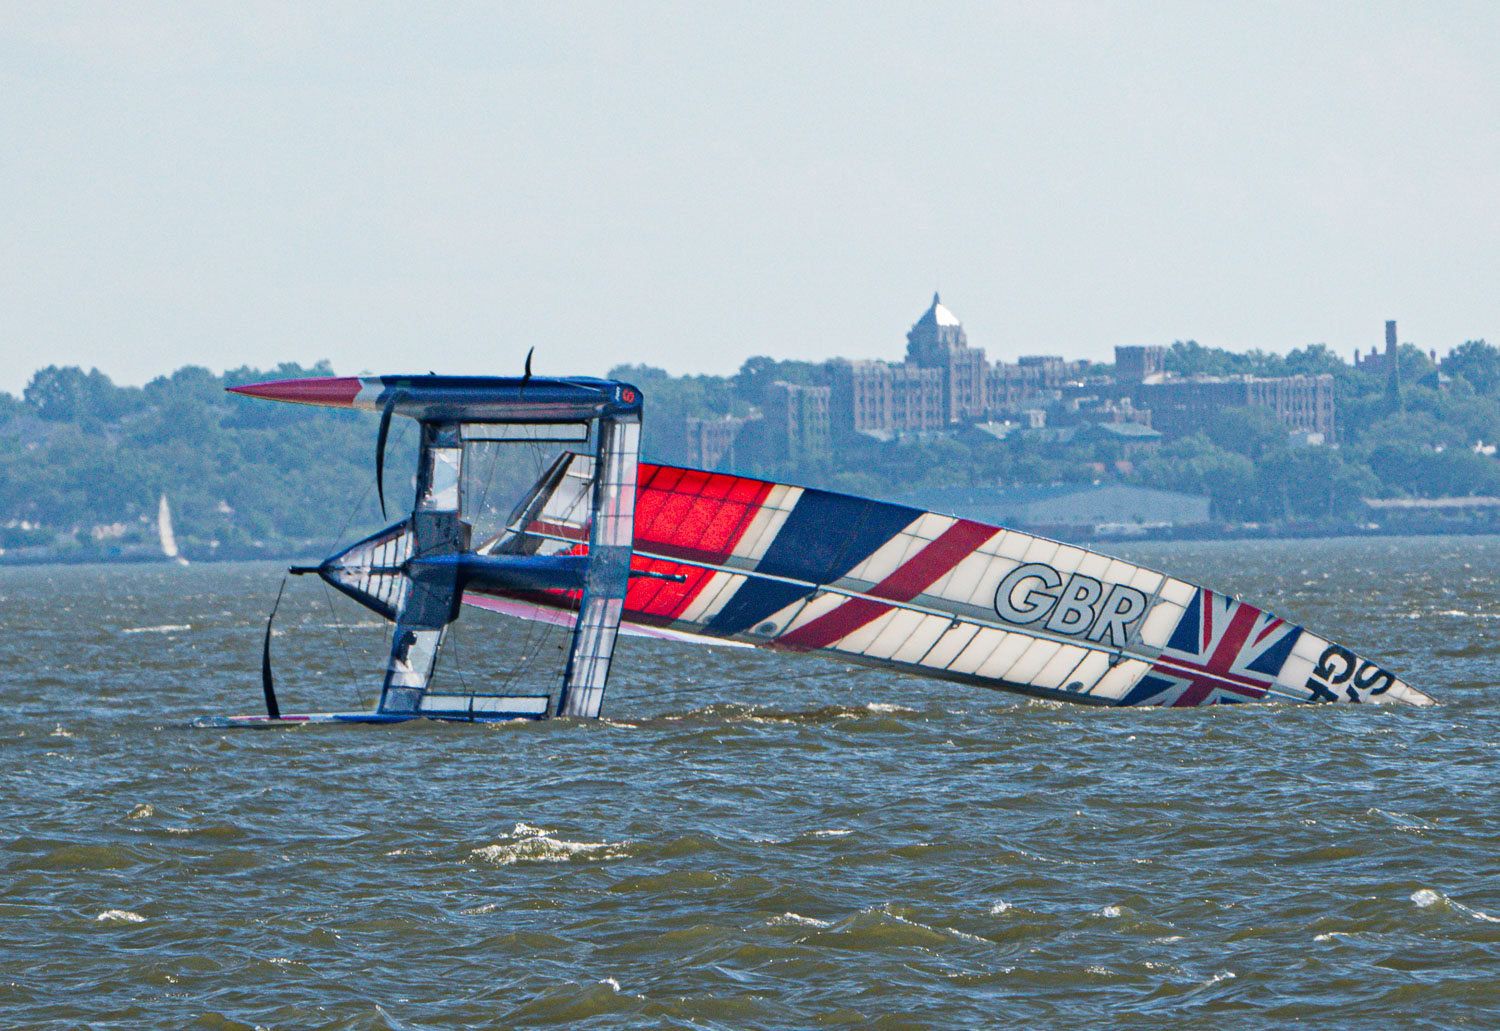 Great Britian capsizes in the Sail GP Race on the Hudson.jpg